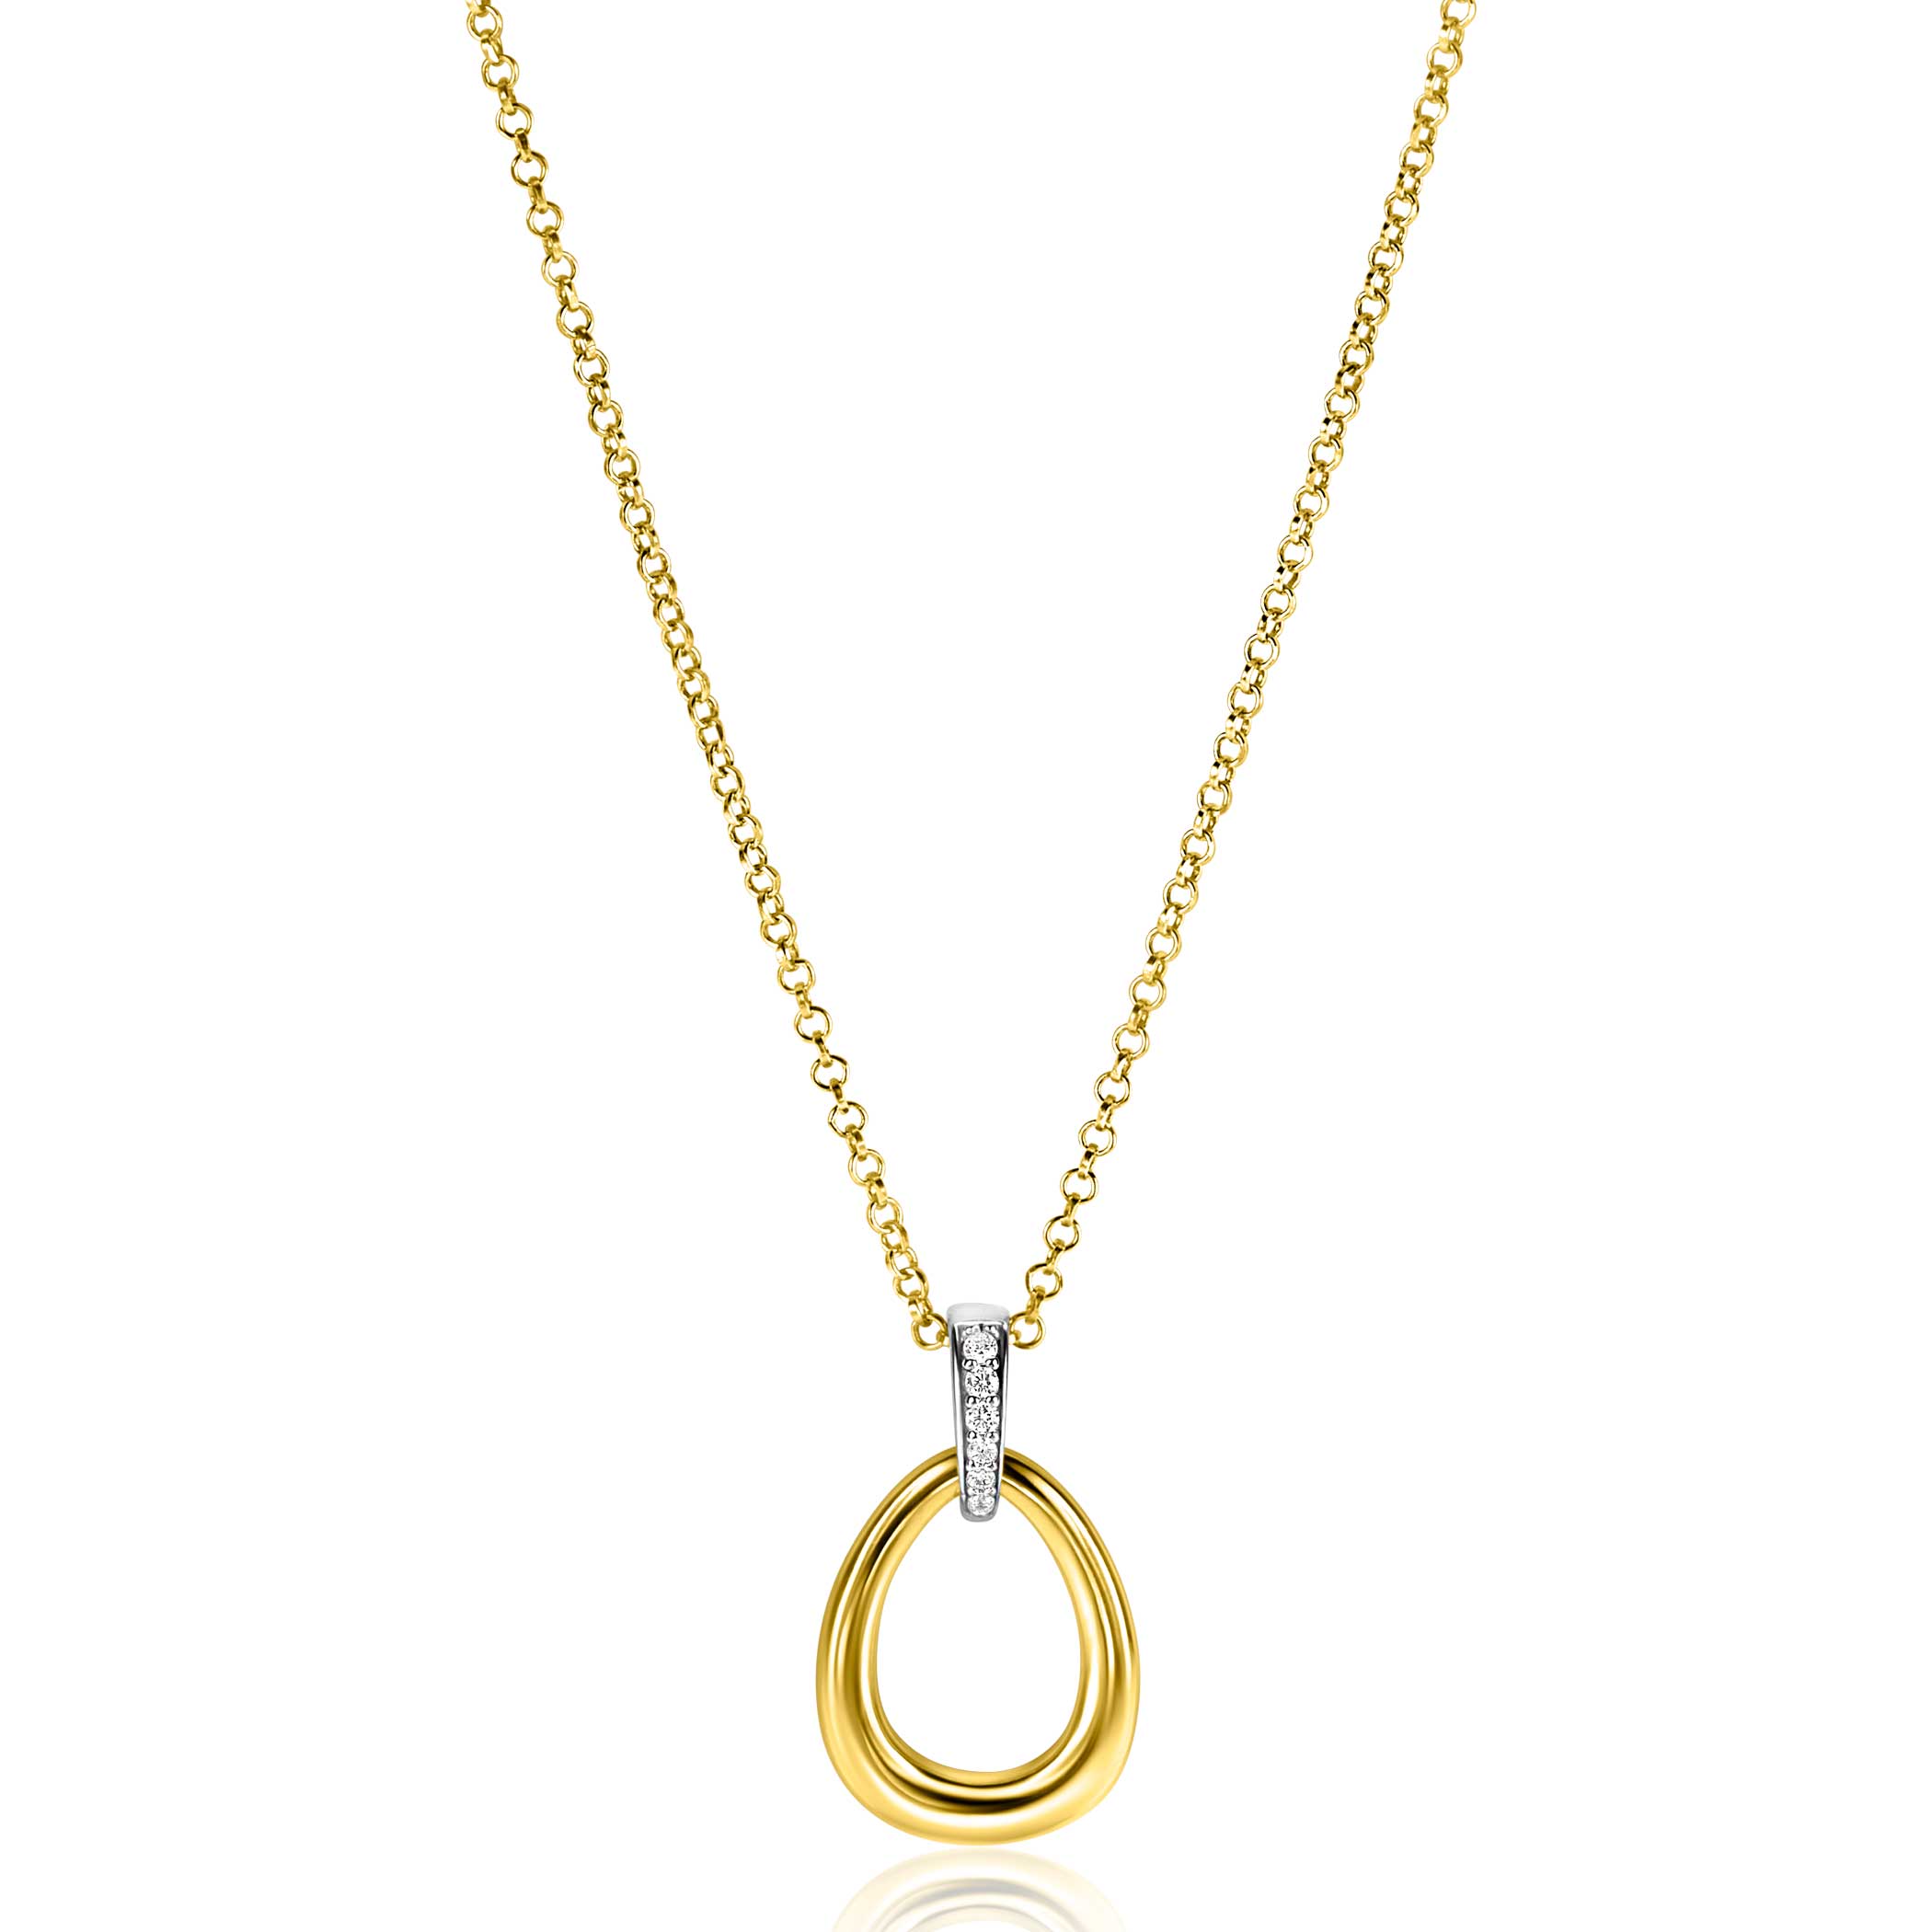 26mm ZINZI Gold Plated Sterling Silver Pendant Bicolor Drop White ZIH1709Y (excl. necklace)